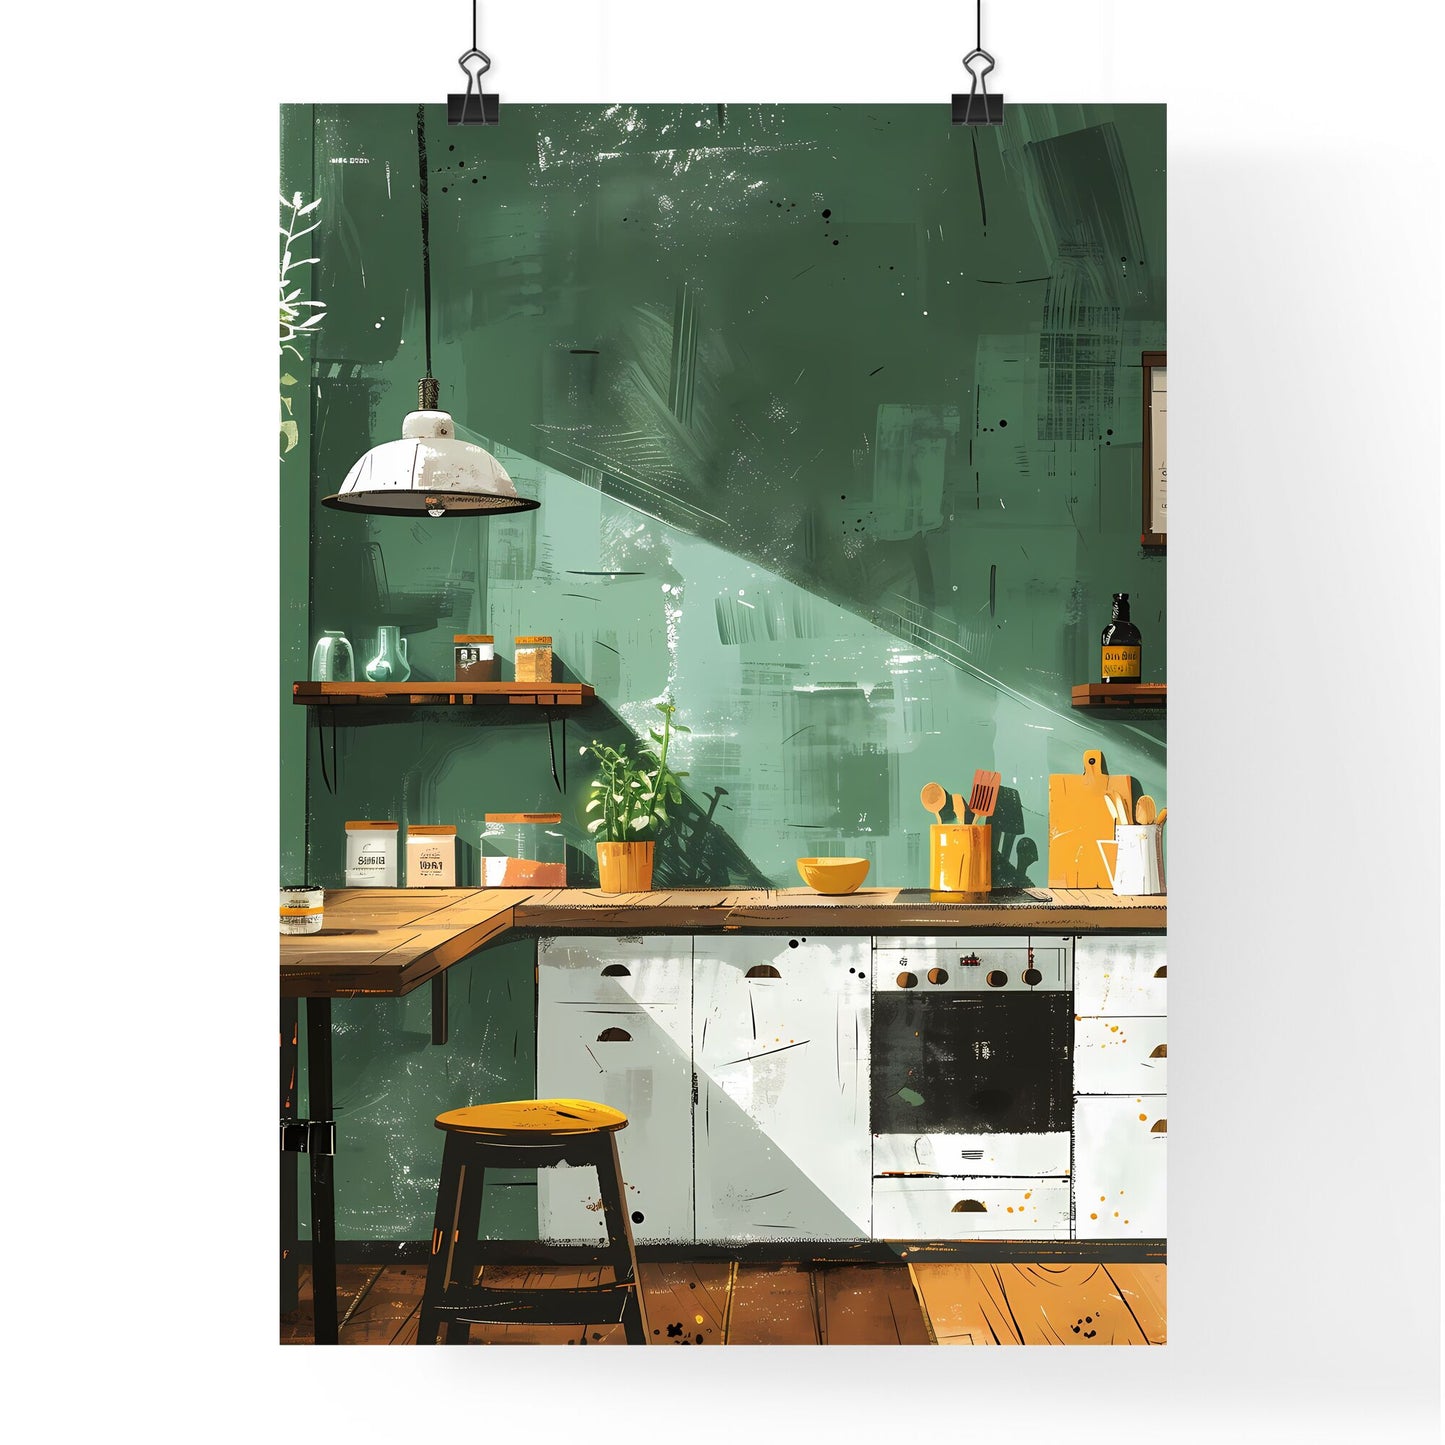 Abstract Art Painting, Multi-Color Lines, Advanced Color Match, Green Background, Kitchen, Table, Stools Default Title